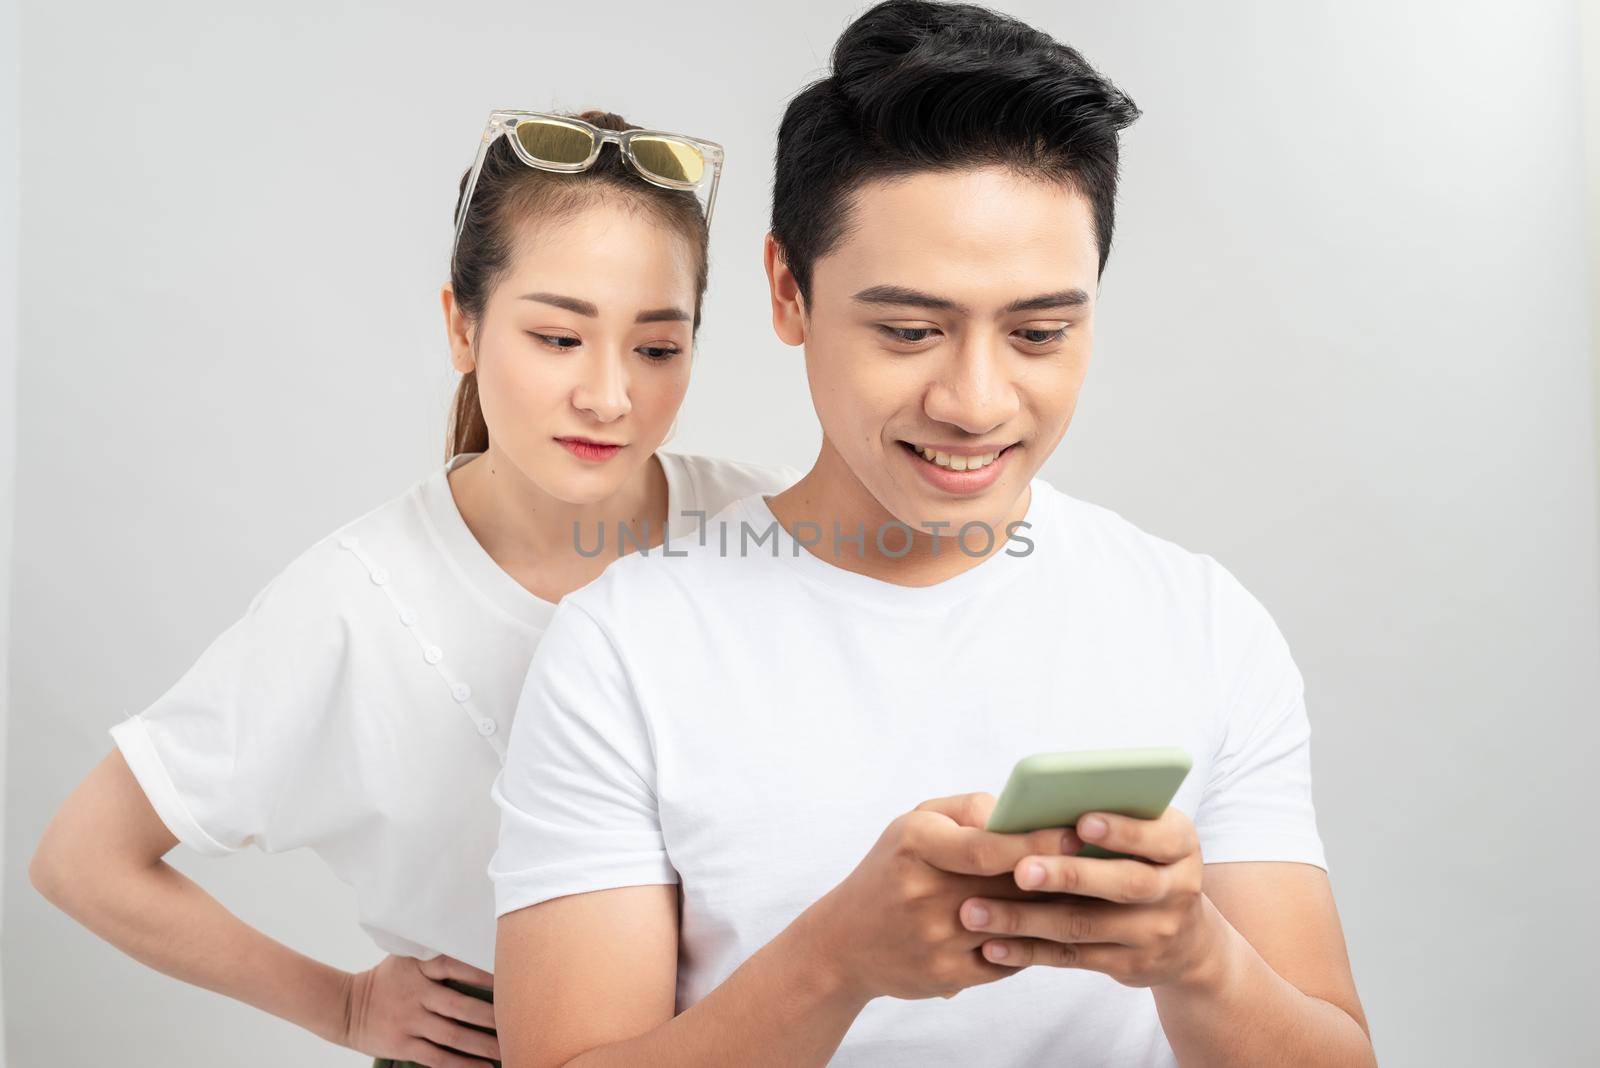 Curious boyfriend is spying his lovers smartphone. They are wearing casual shirts, standing isolated on white background